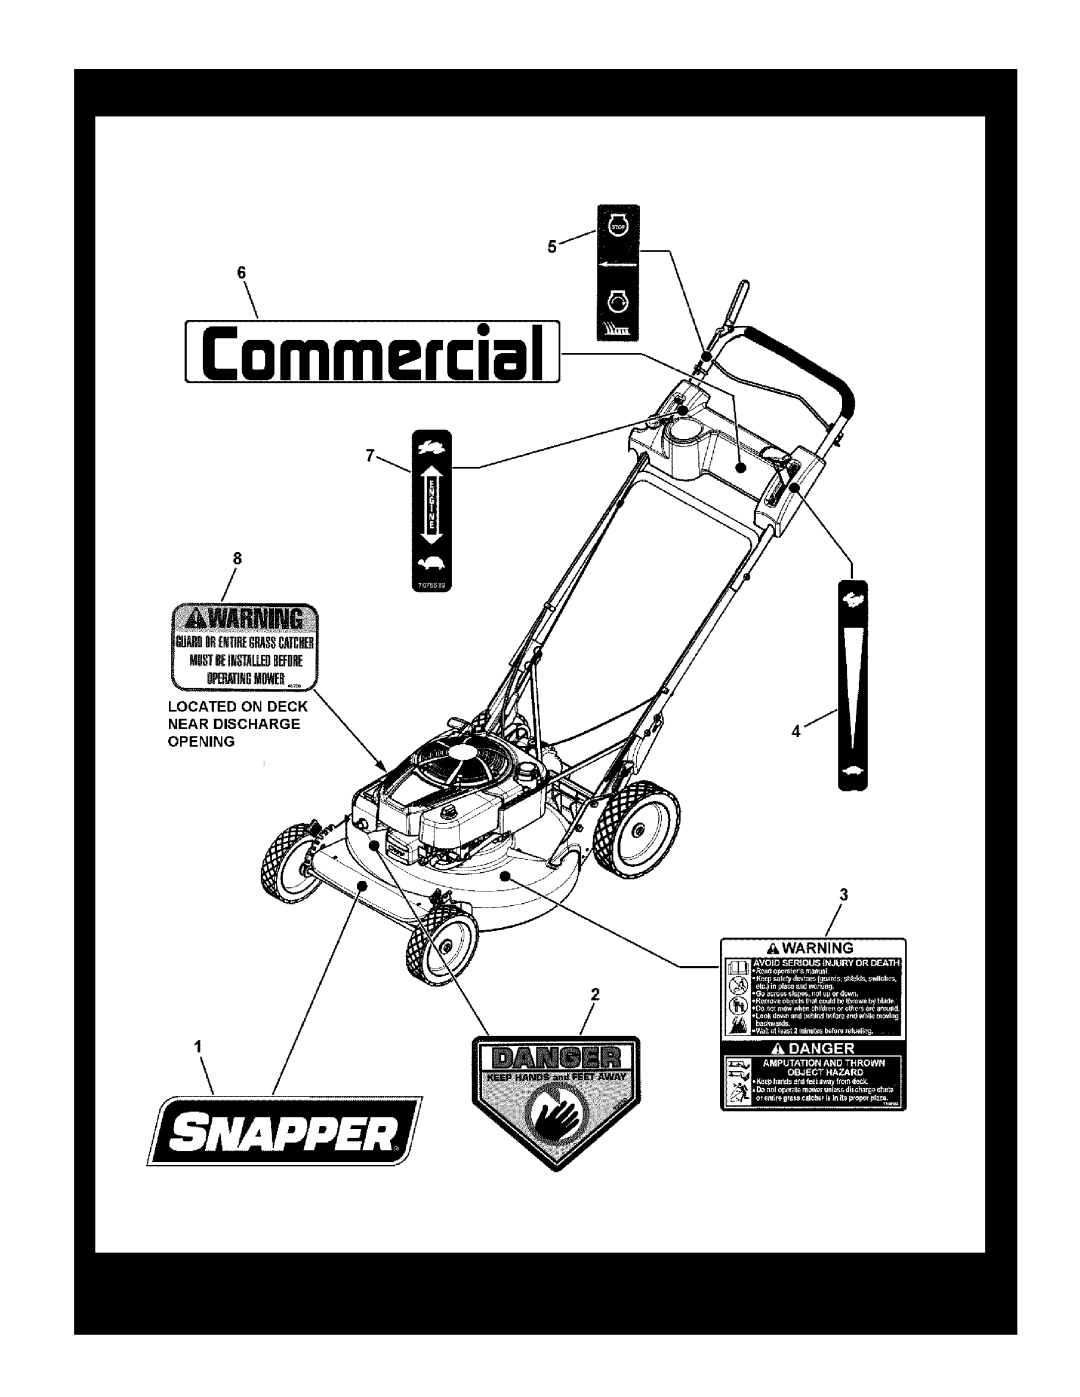 Snapper 7800764, 7800772 manual Decals Group, Reproduction, Manual No, 7104803, Steel Deck Walk Behind, Series 